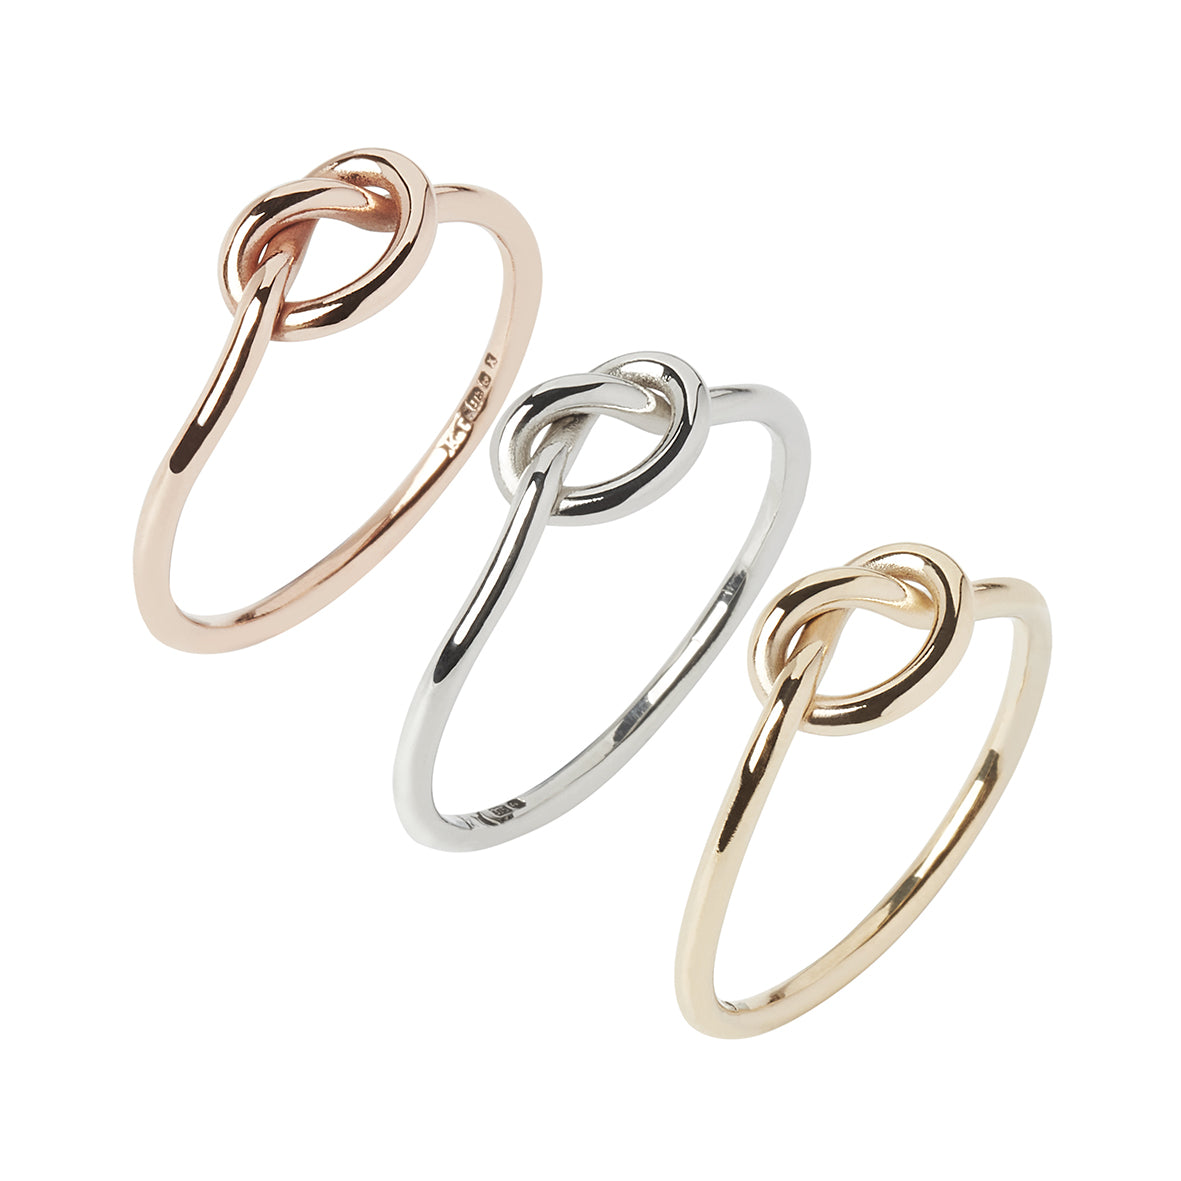 3 gold tie the knot rings, yellow, white and rose gold on a white background, Handcrafted by Kirsty Taylor in Corbridge Northumberland